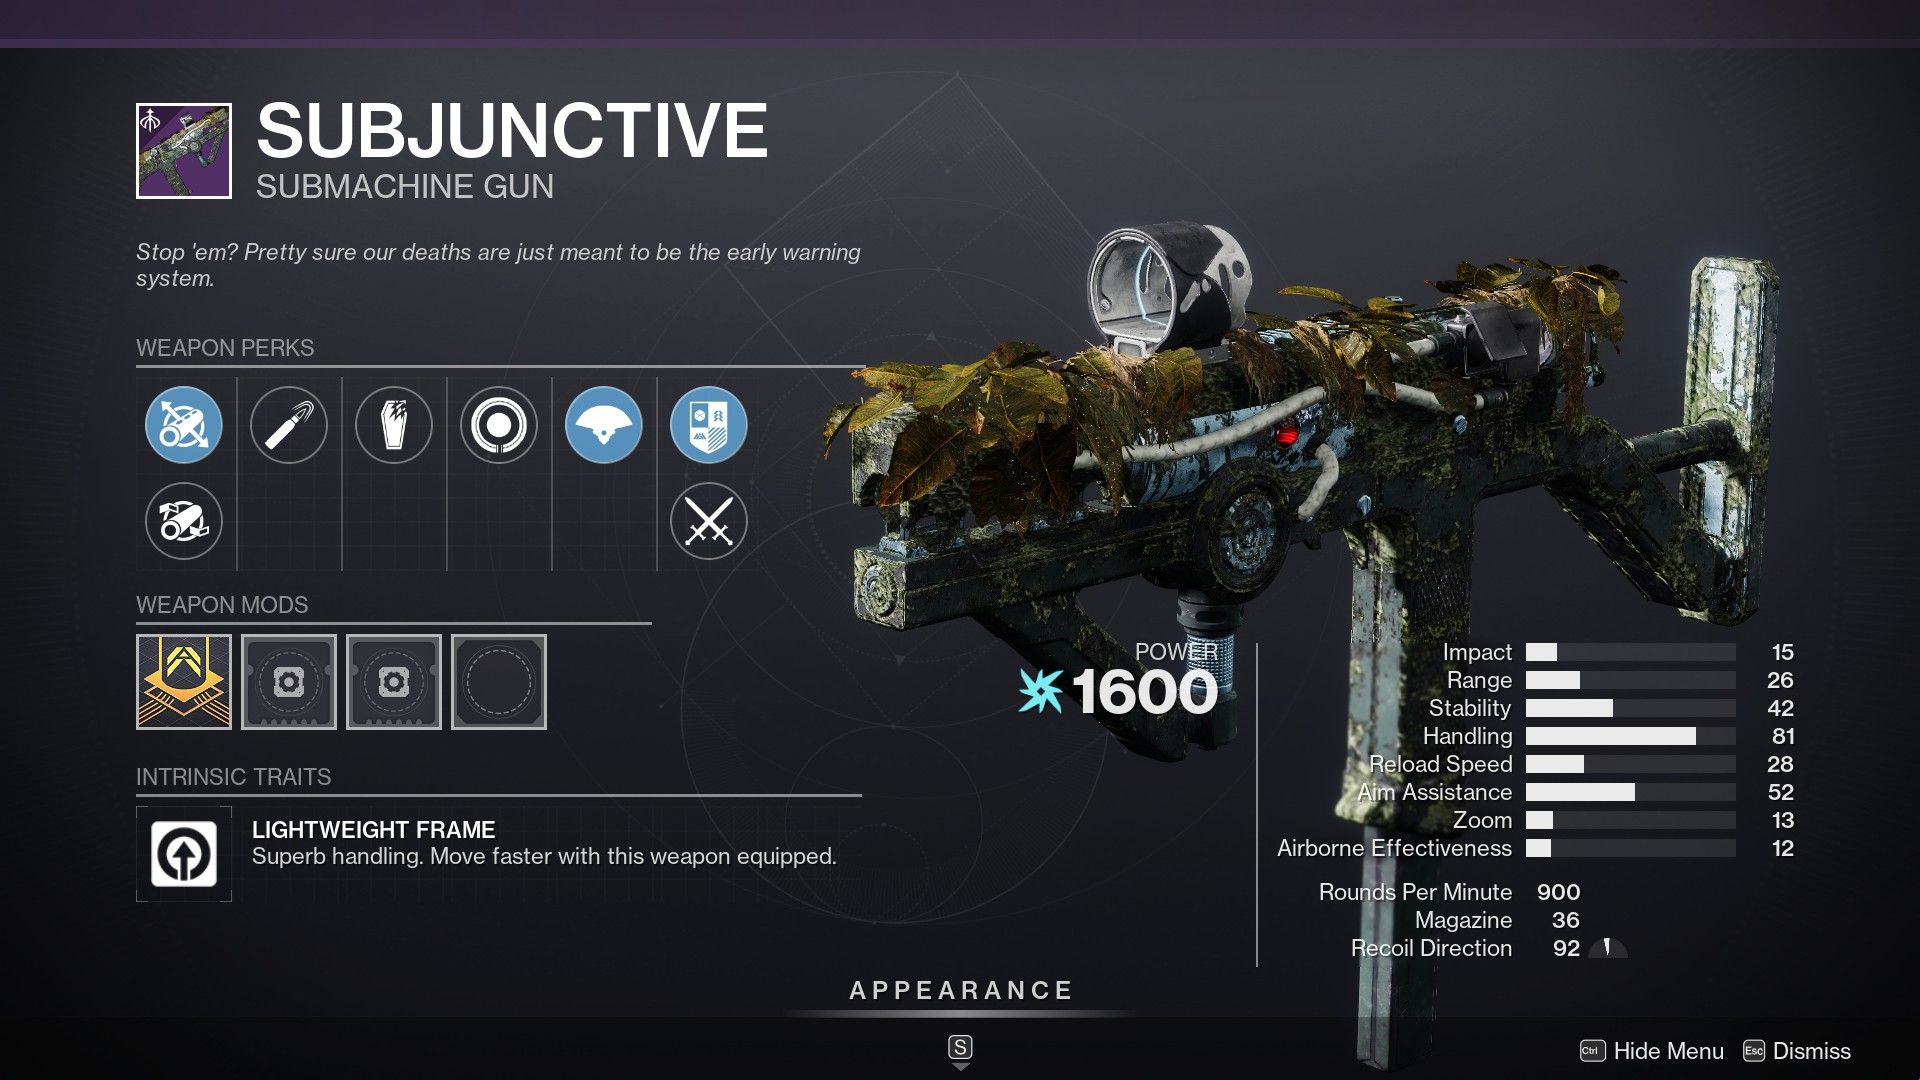 The curated roll for the Subjunctive in Destiny 2